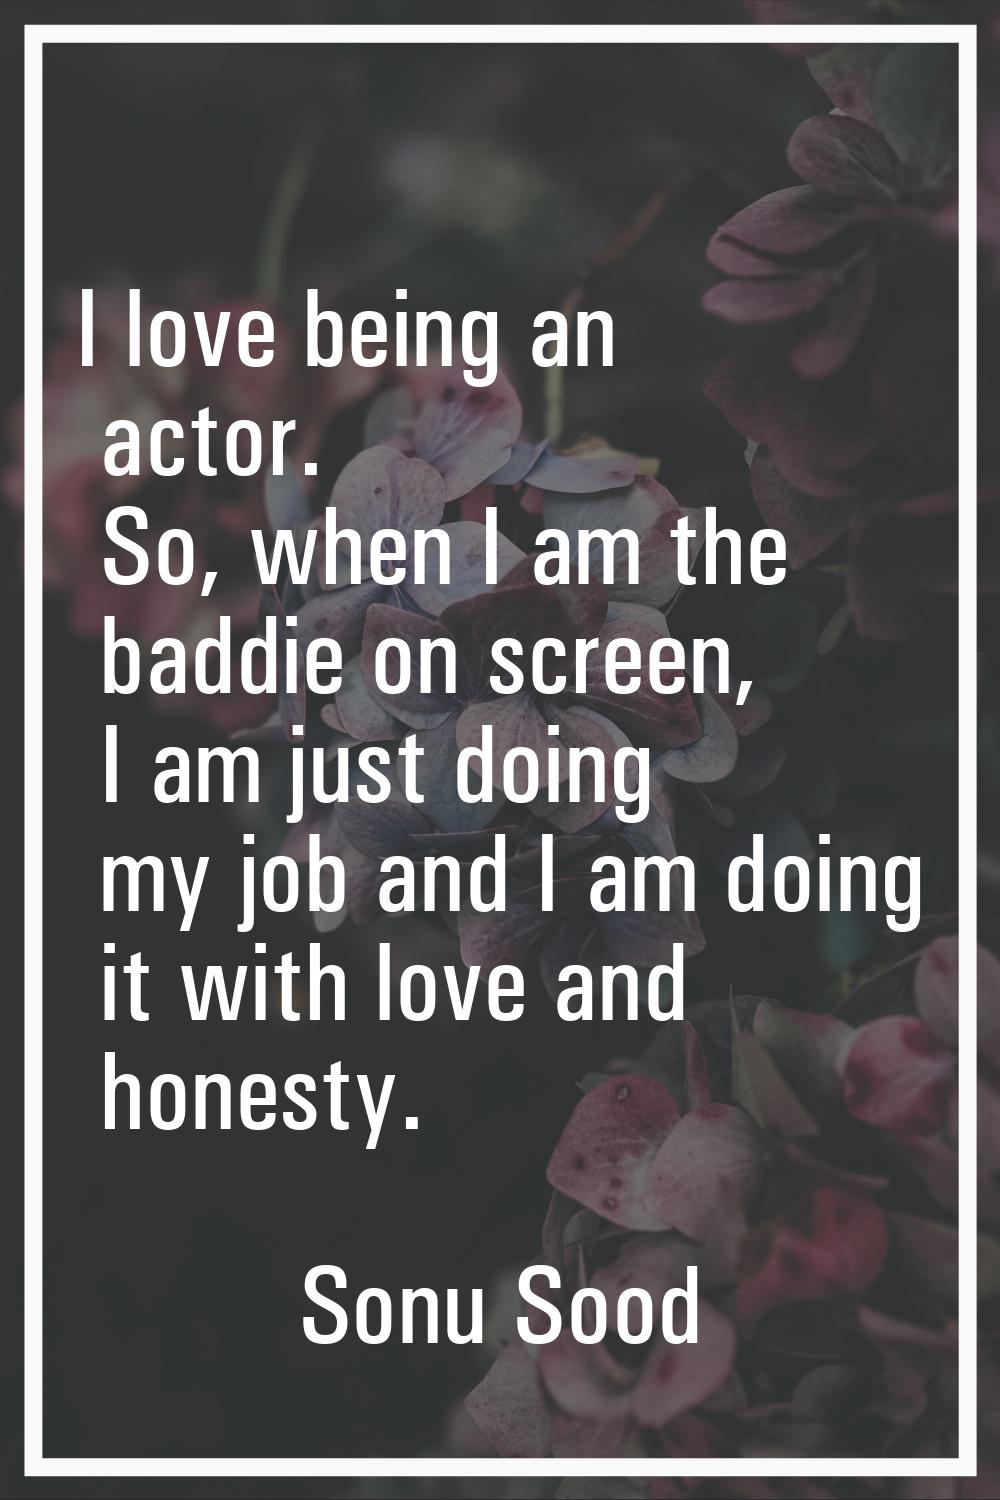 I love being an actor. So, when I am the baddie on screen, I am just doing my job and I am doing it